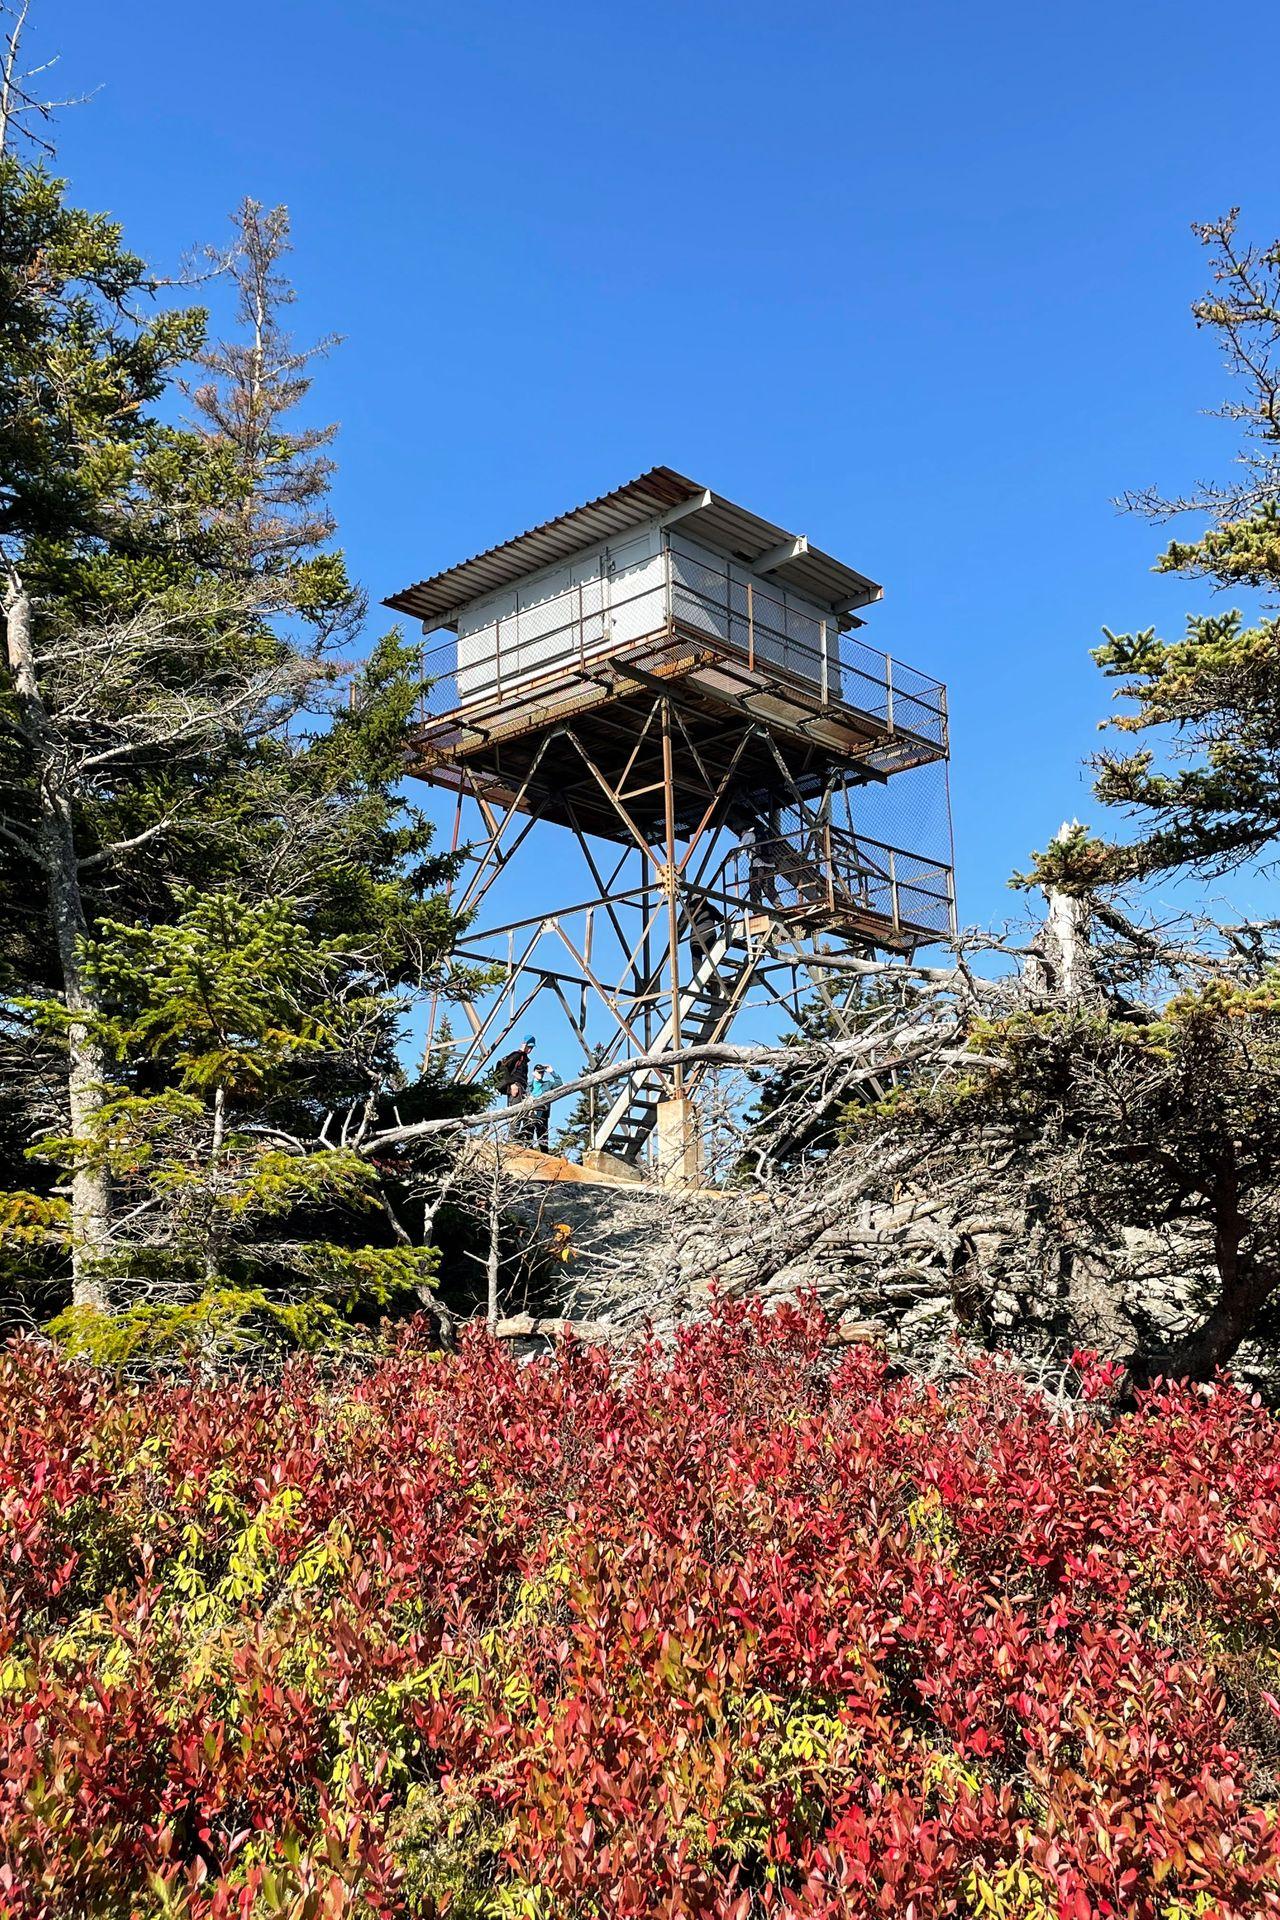 Looking at the Fire Tower with red brush in front of it.